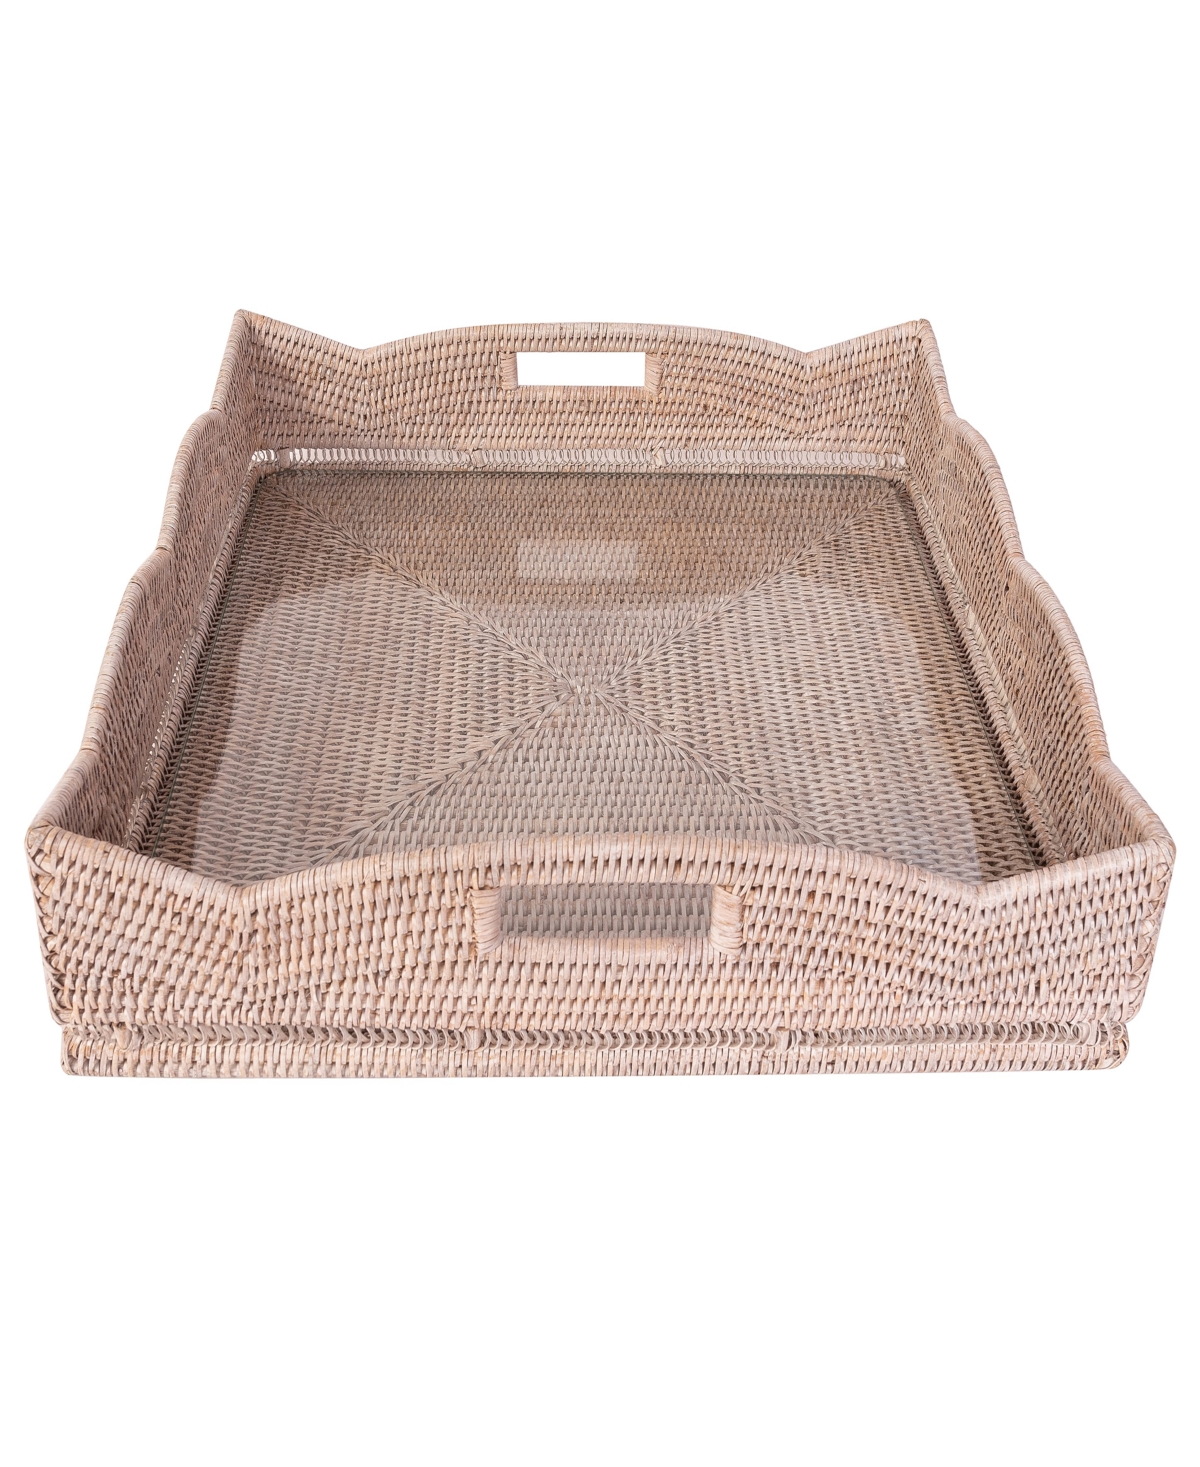 Artifacts Trading Company Artifacts Rattan Scallop Square Tray With Glass Insert In White Wash